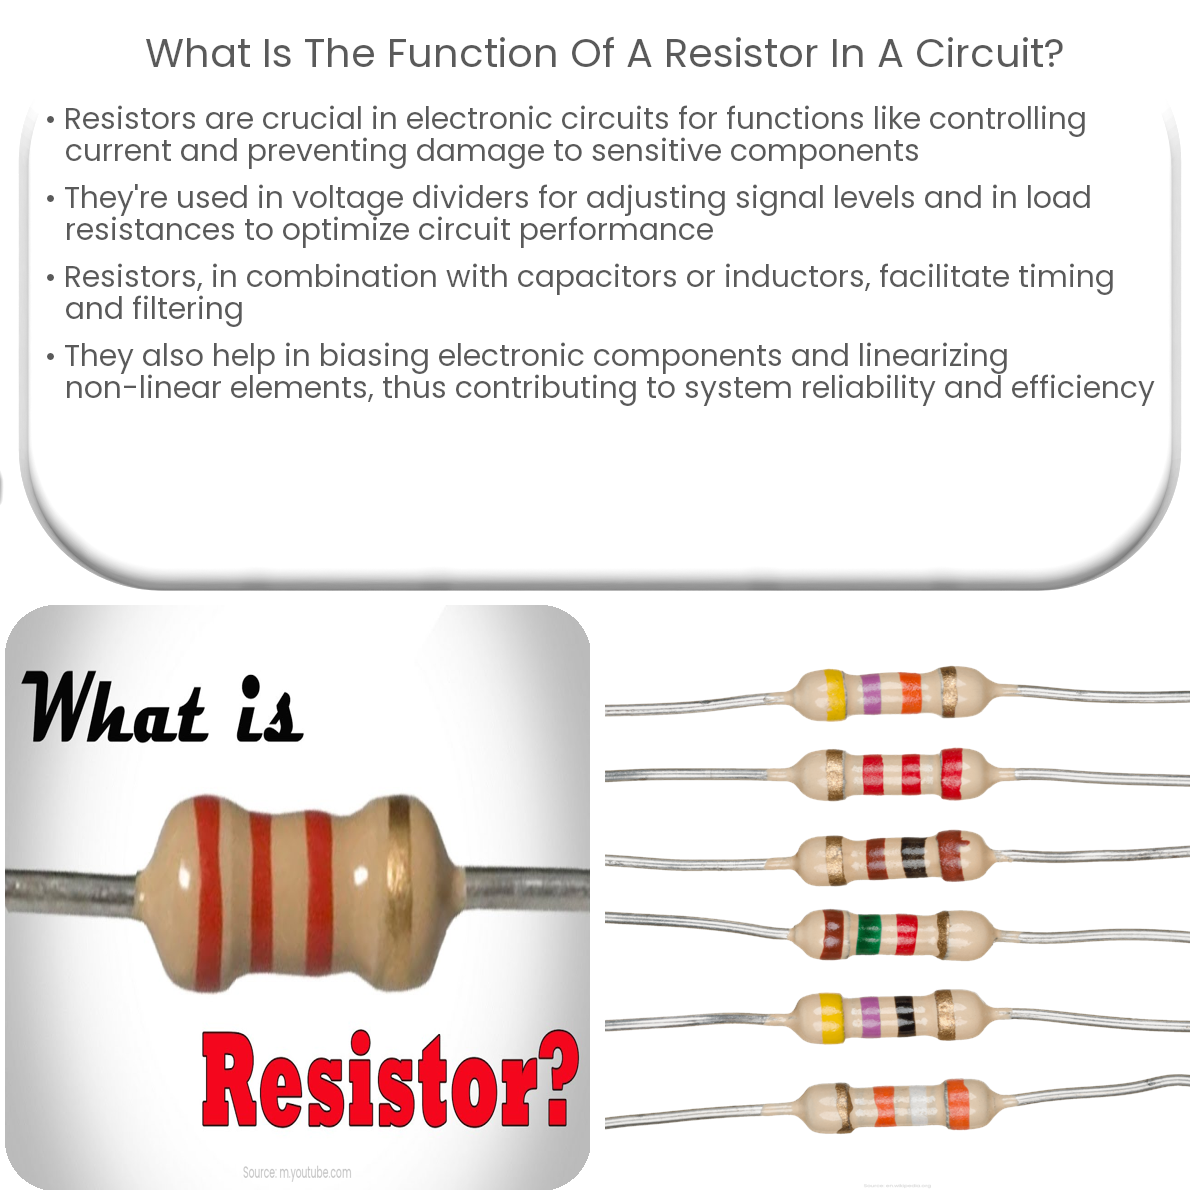 What is the function of a resistor in a circuit?